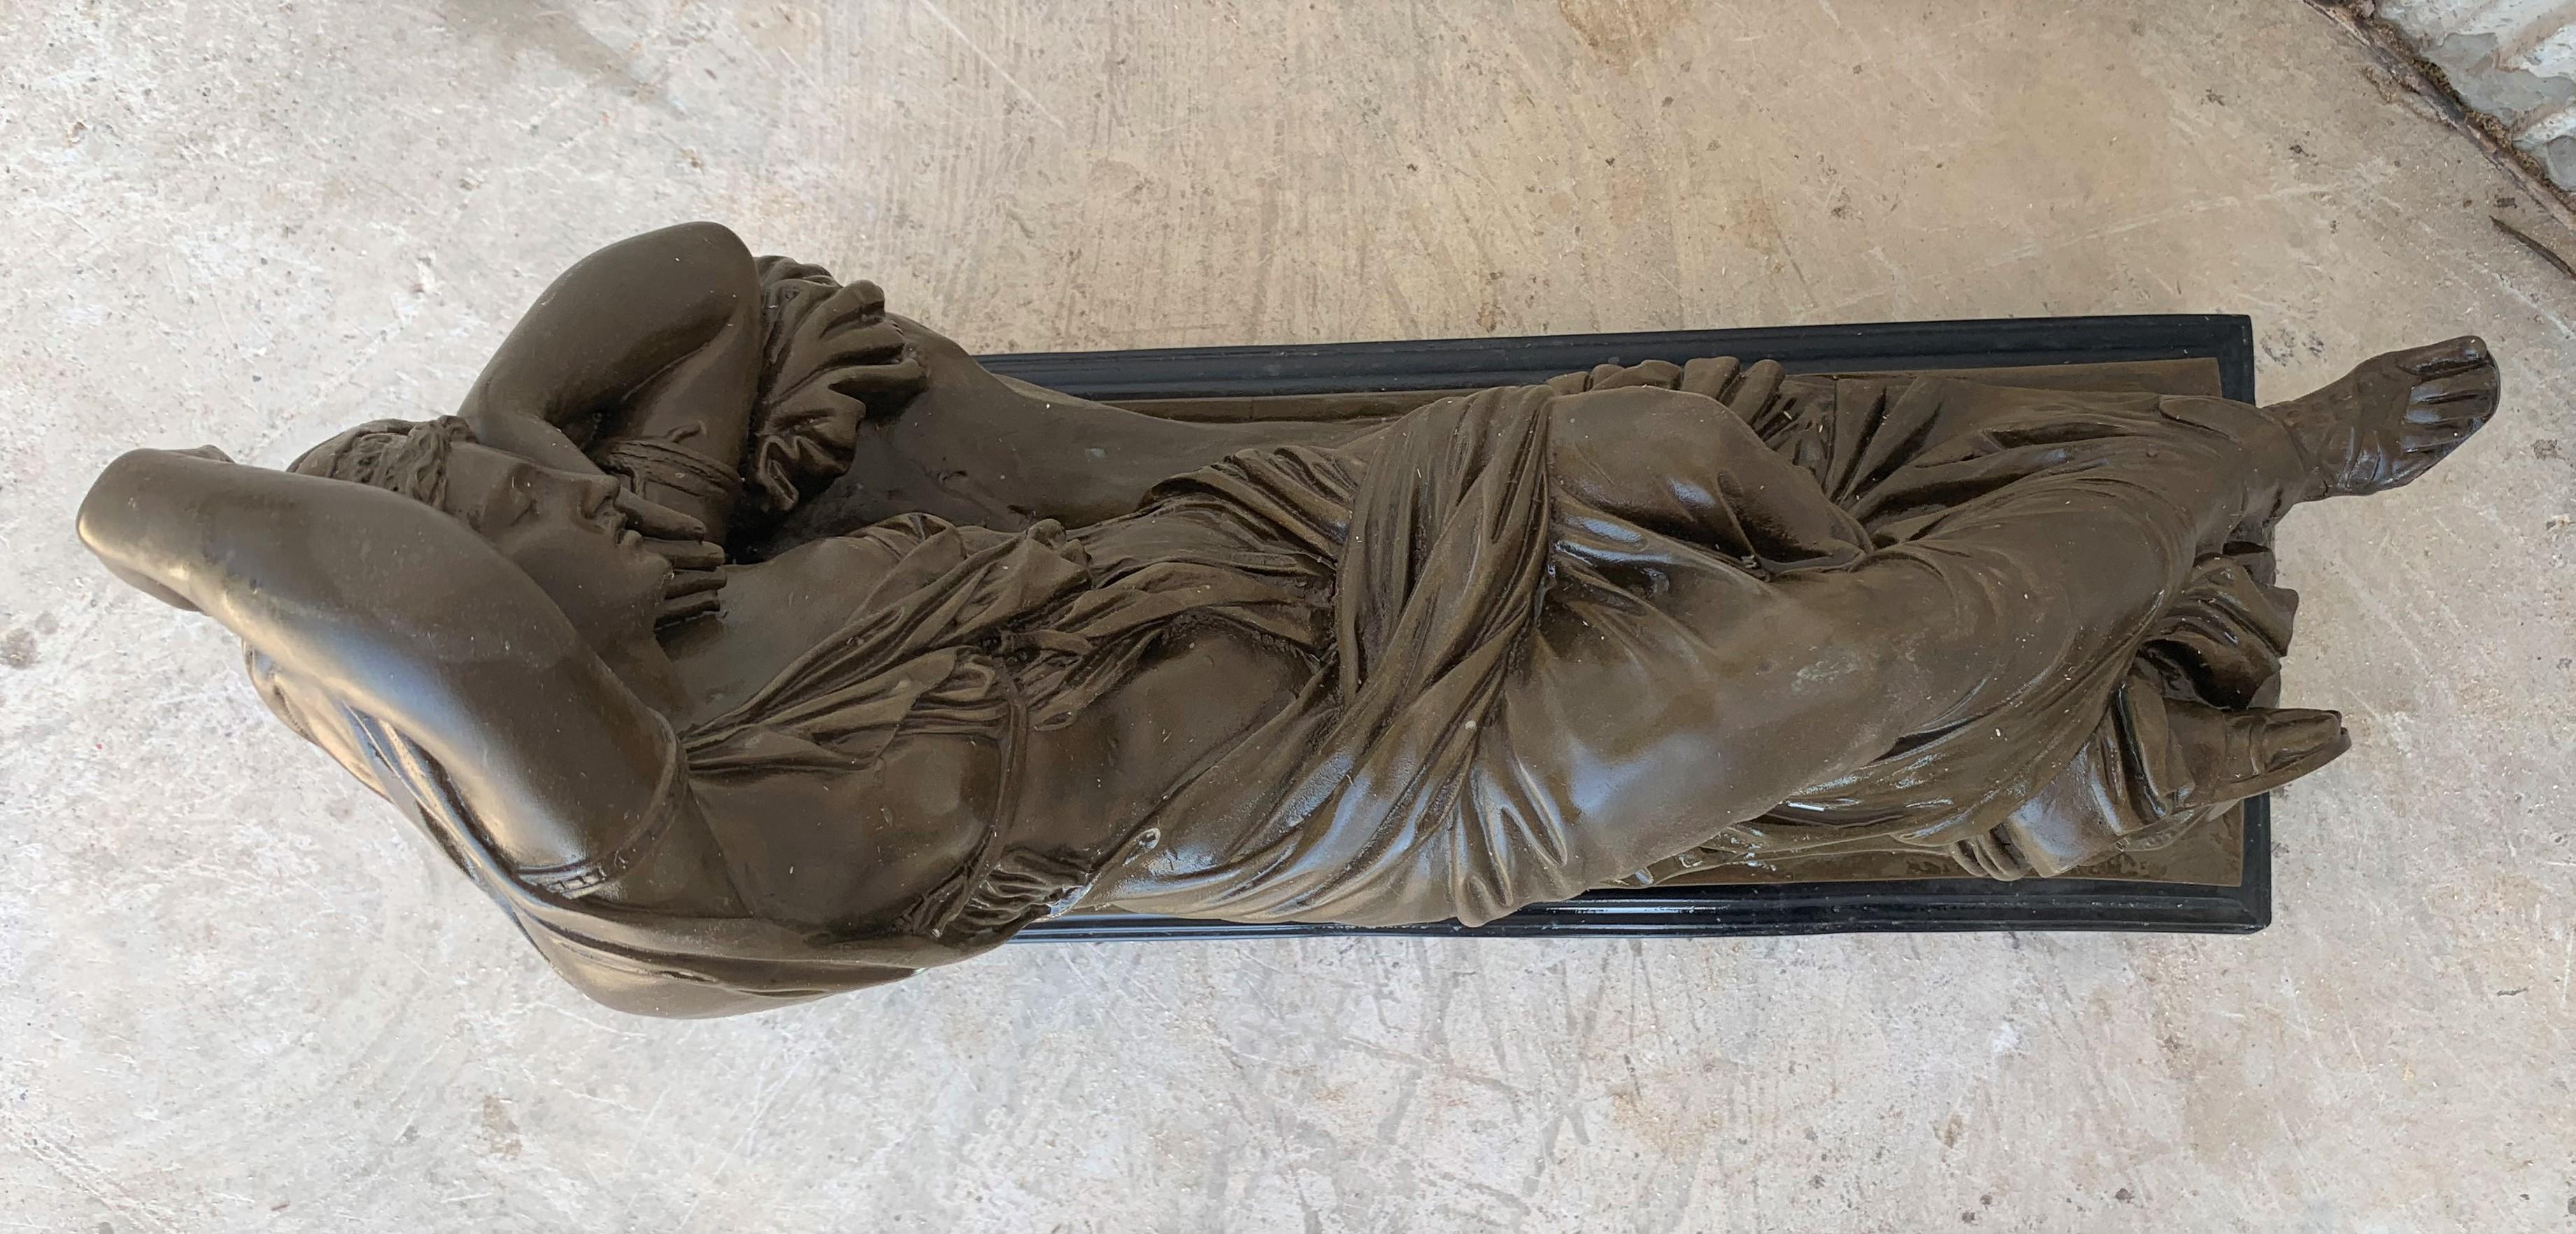 Italian Bronze Tuscany Neoclassical Style Sculpture Featuring a Relaxed Woman In Good Condition For Sale In Miami, FL